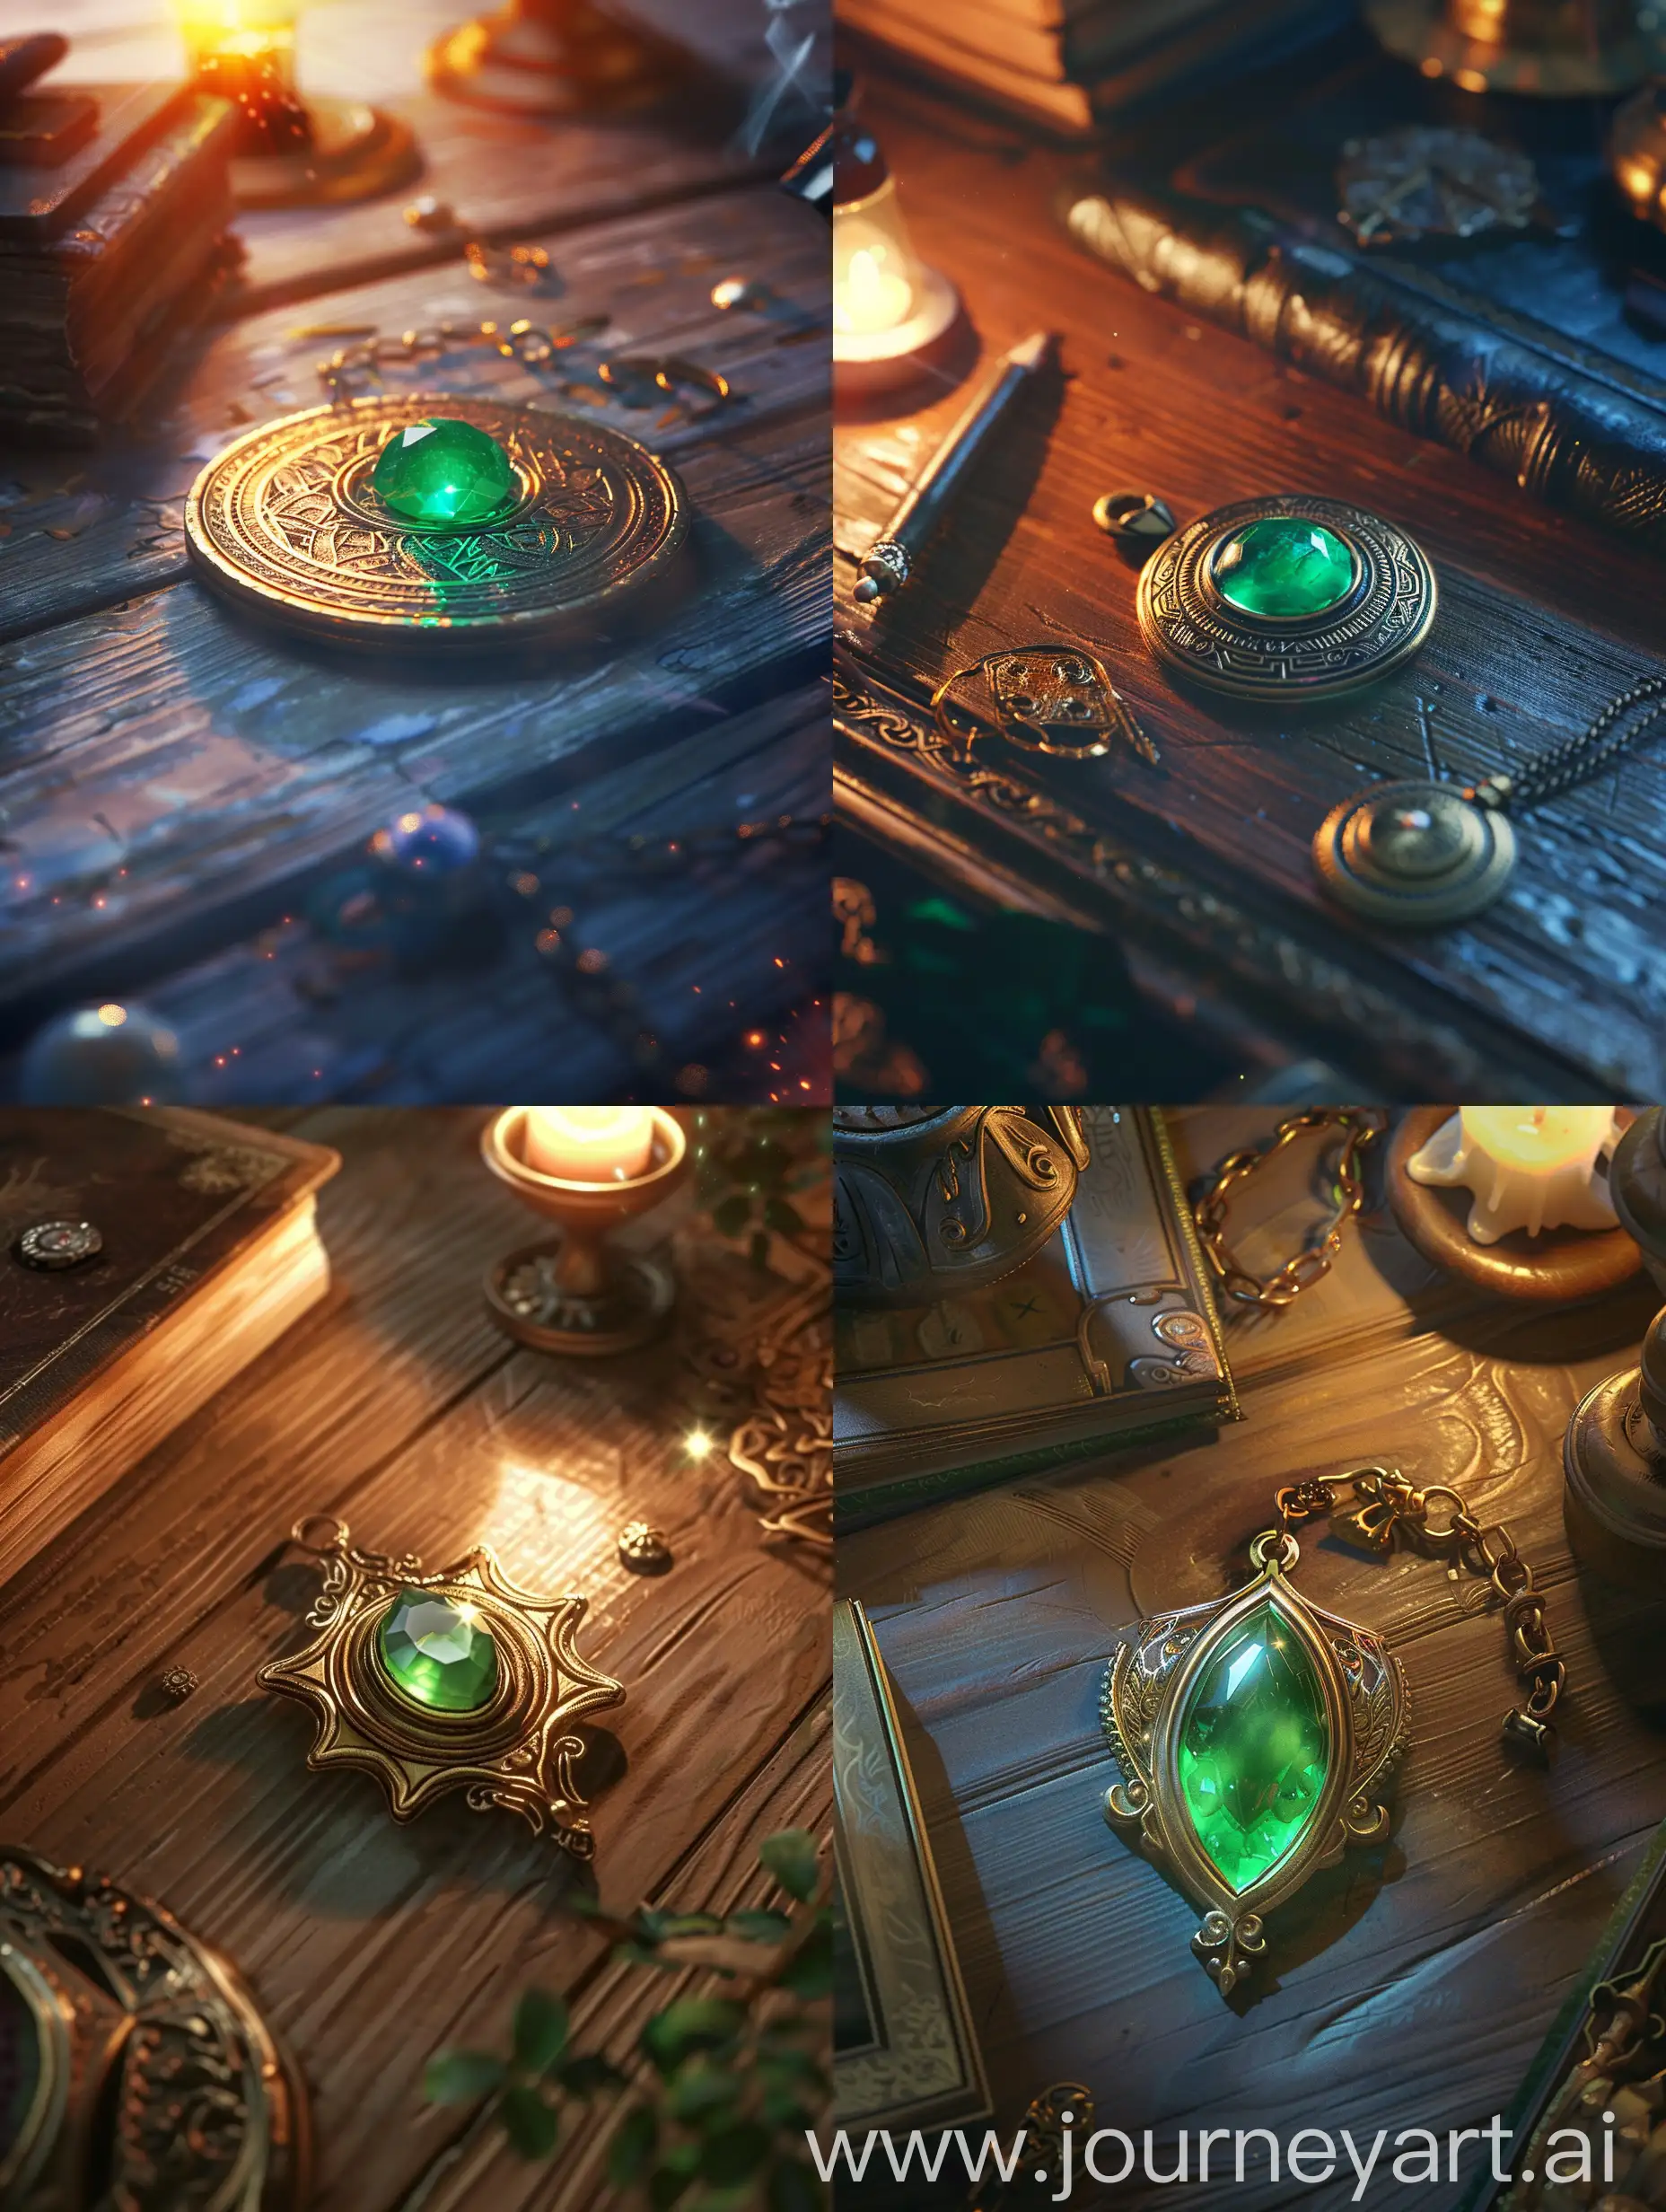 a magical amulet with a green stone in the middle lying on the table, anime style.